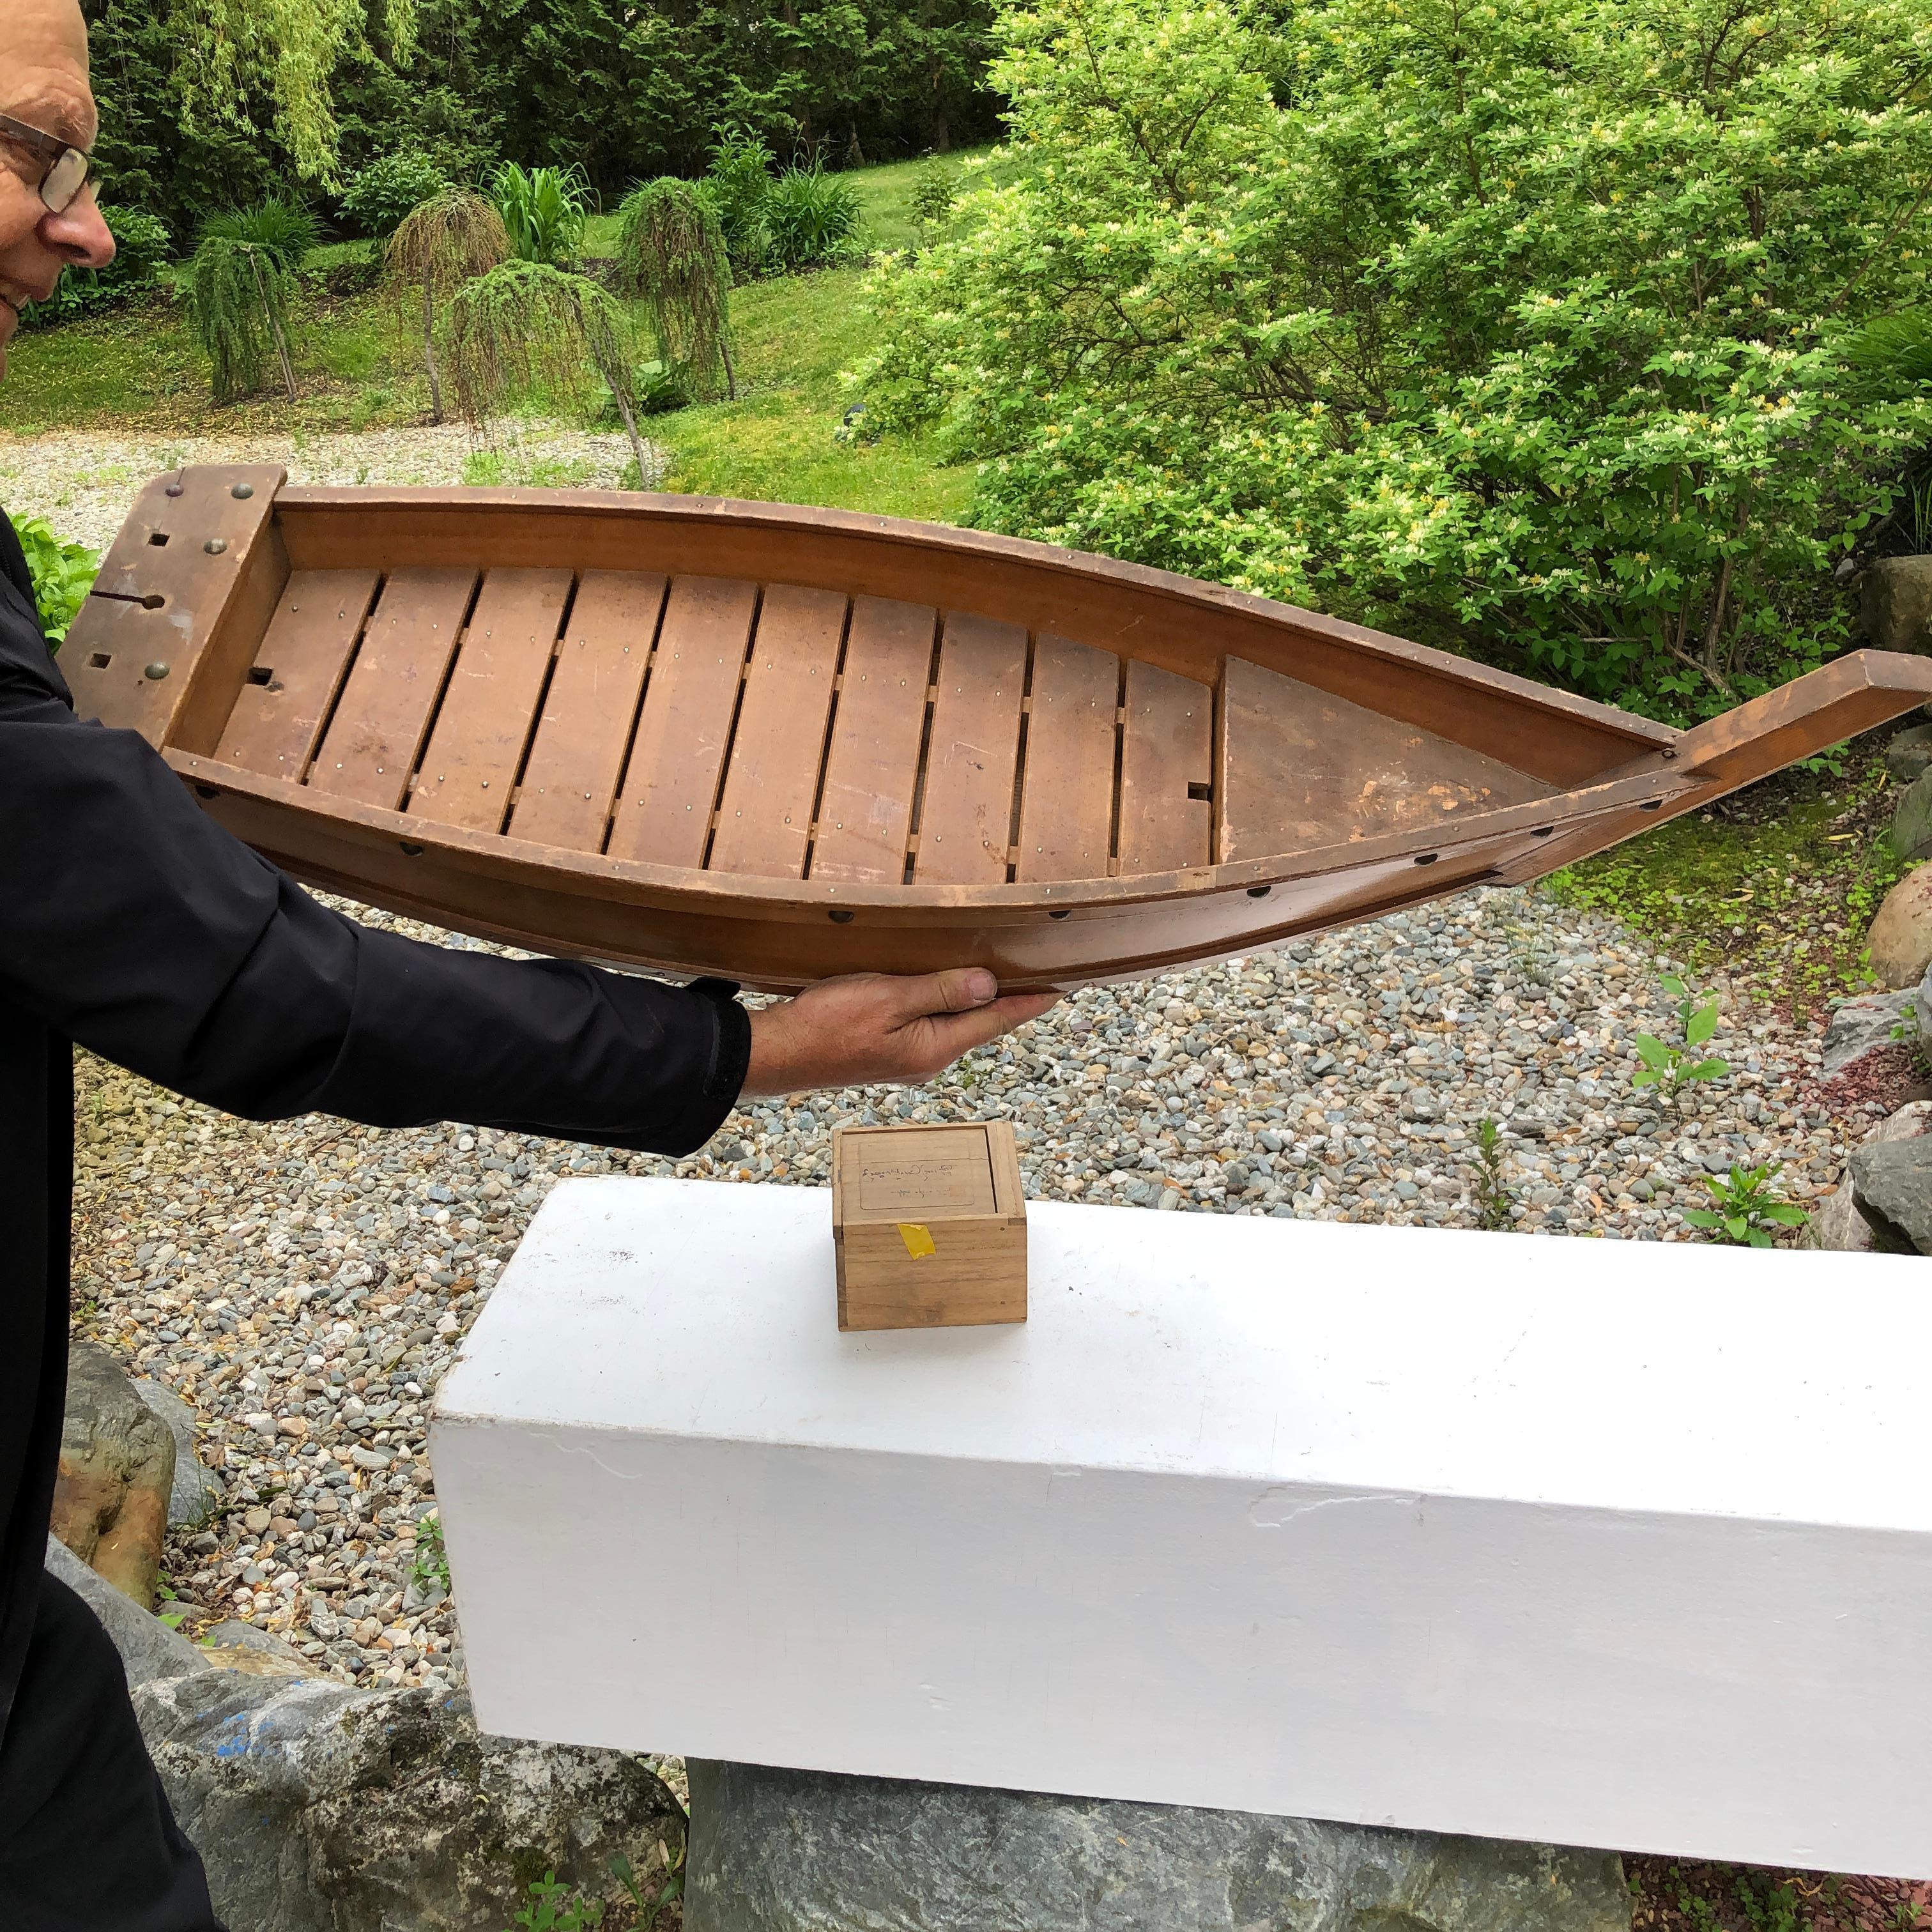 Fresh find from our recent Japanese acquisitions travels, 42 inches long

This big old hand carved wooden boat -fune- including a hand fitted wooden slat interior and brass riveted exterior was likely once used decades ago as a flower arranging